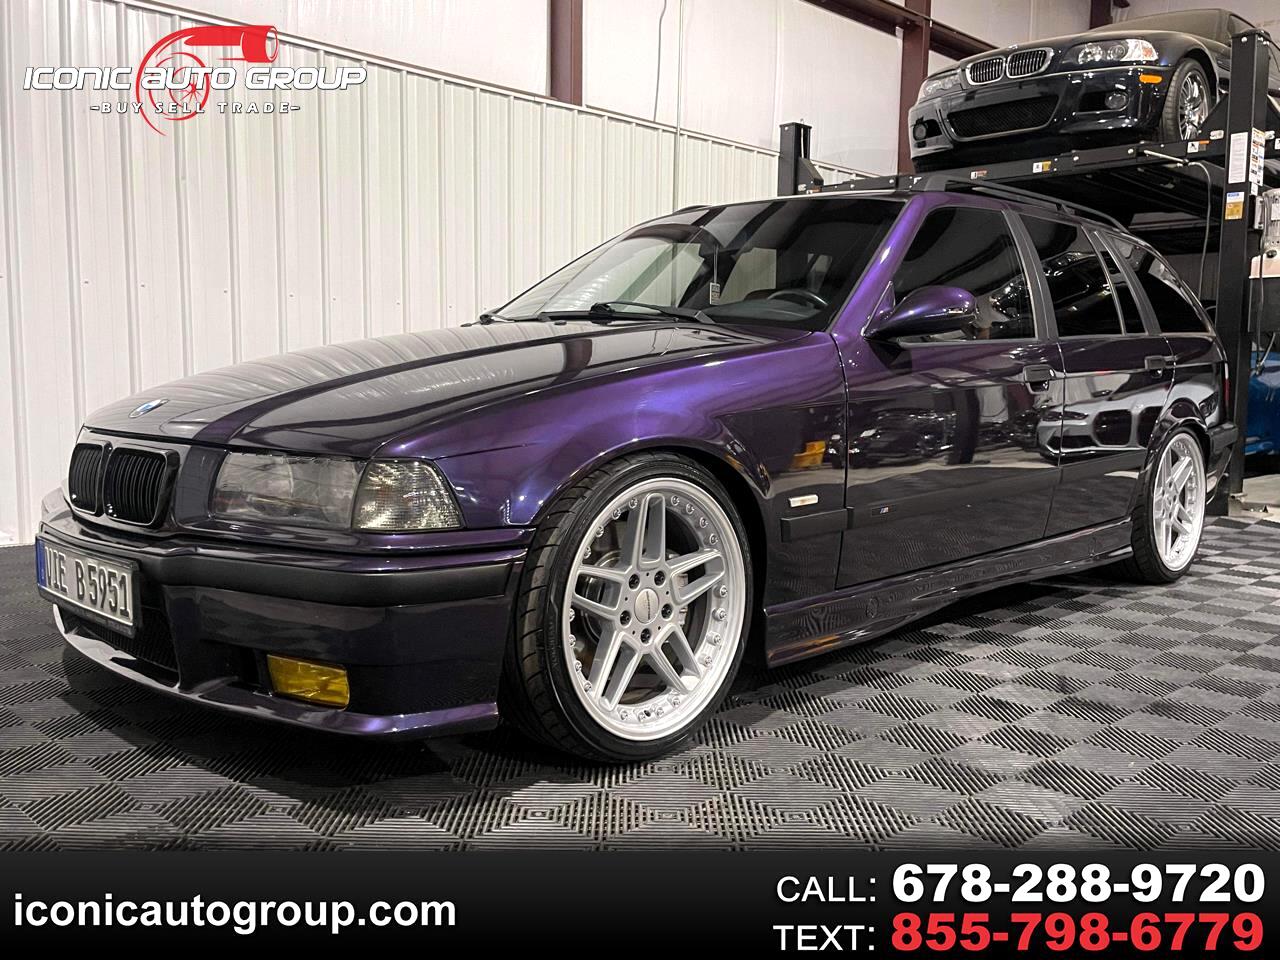 1997 BMW M3 Restored top to bottom. $60,000 invested.